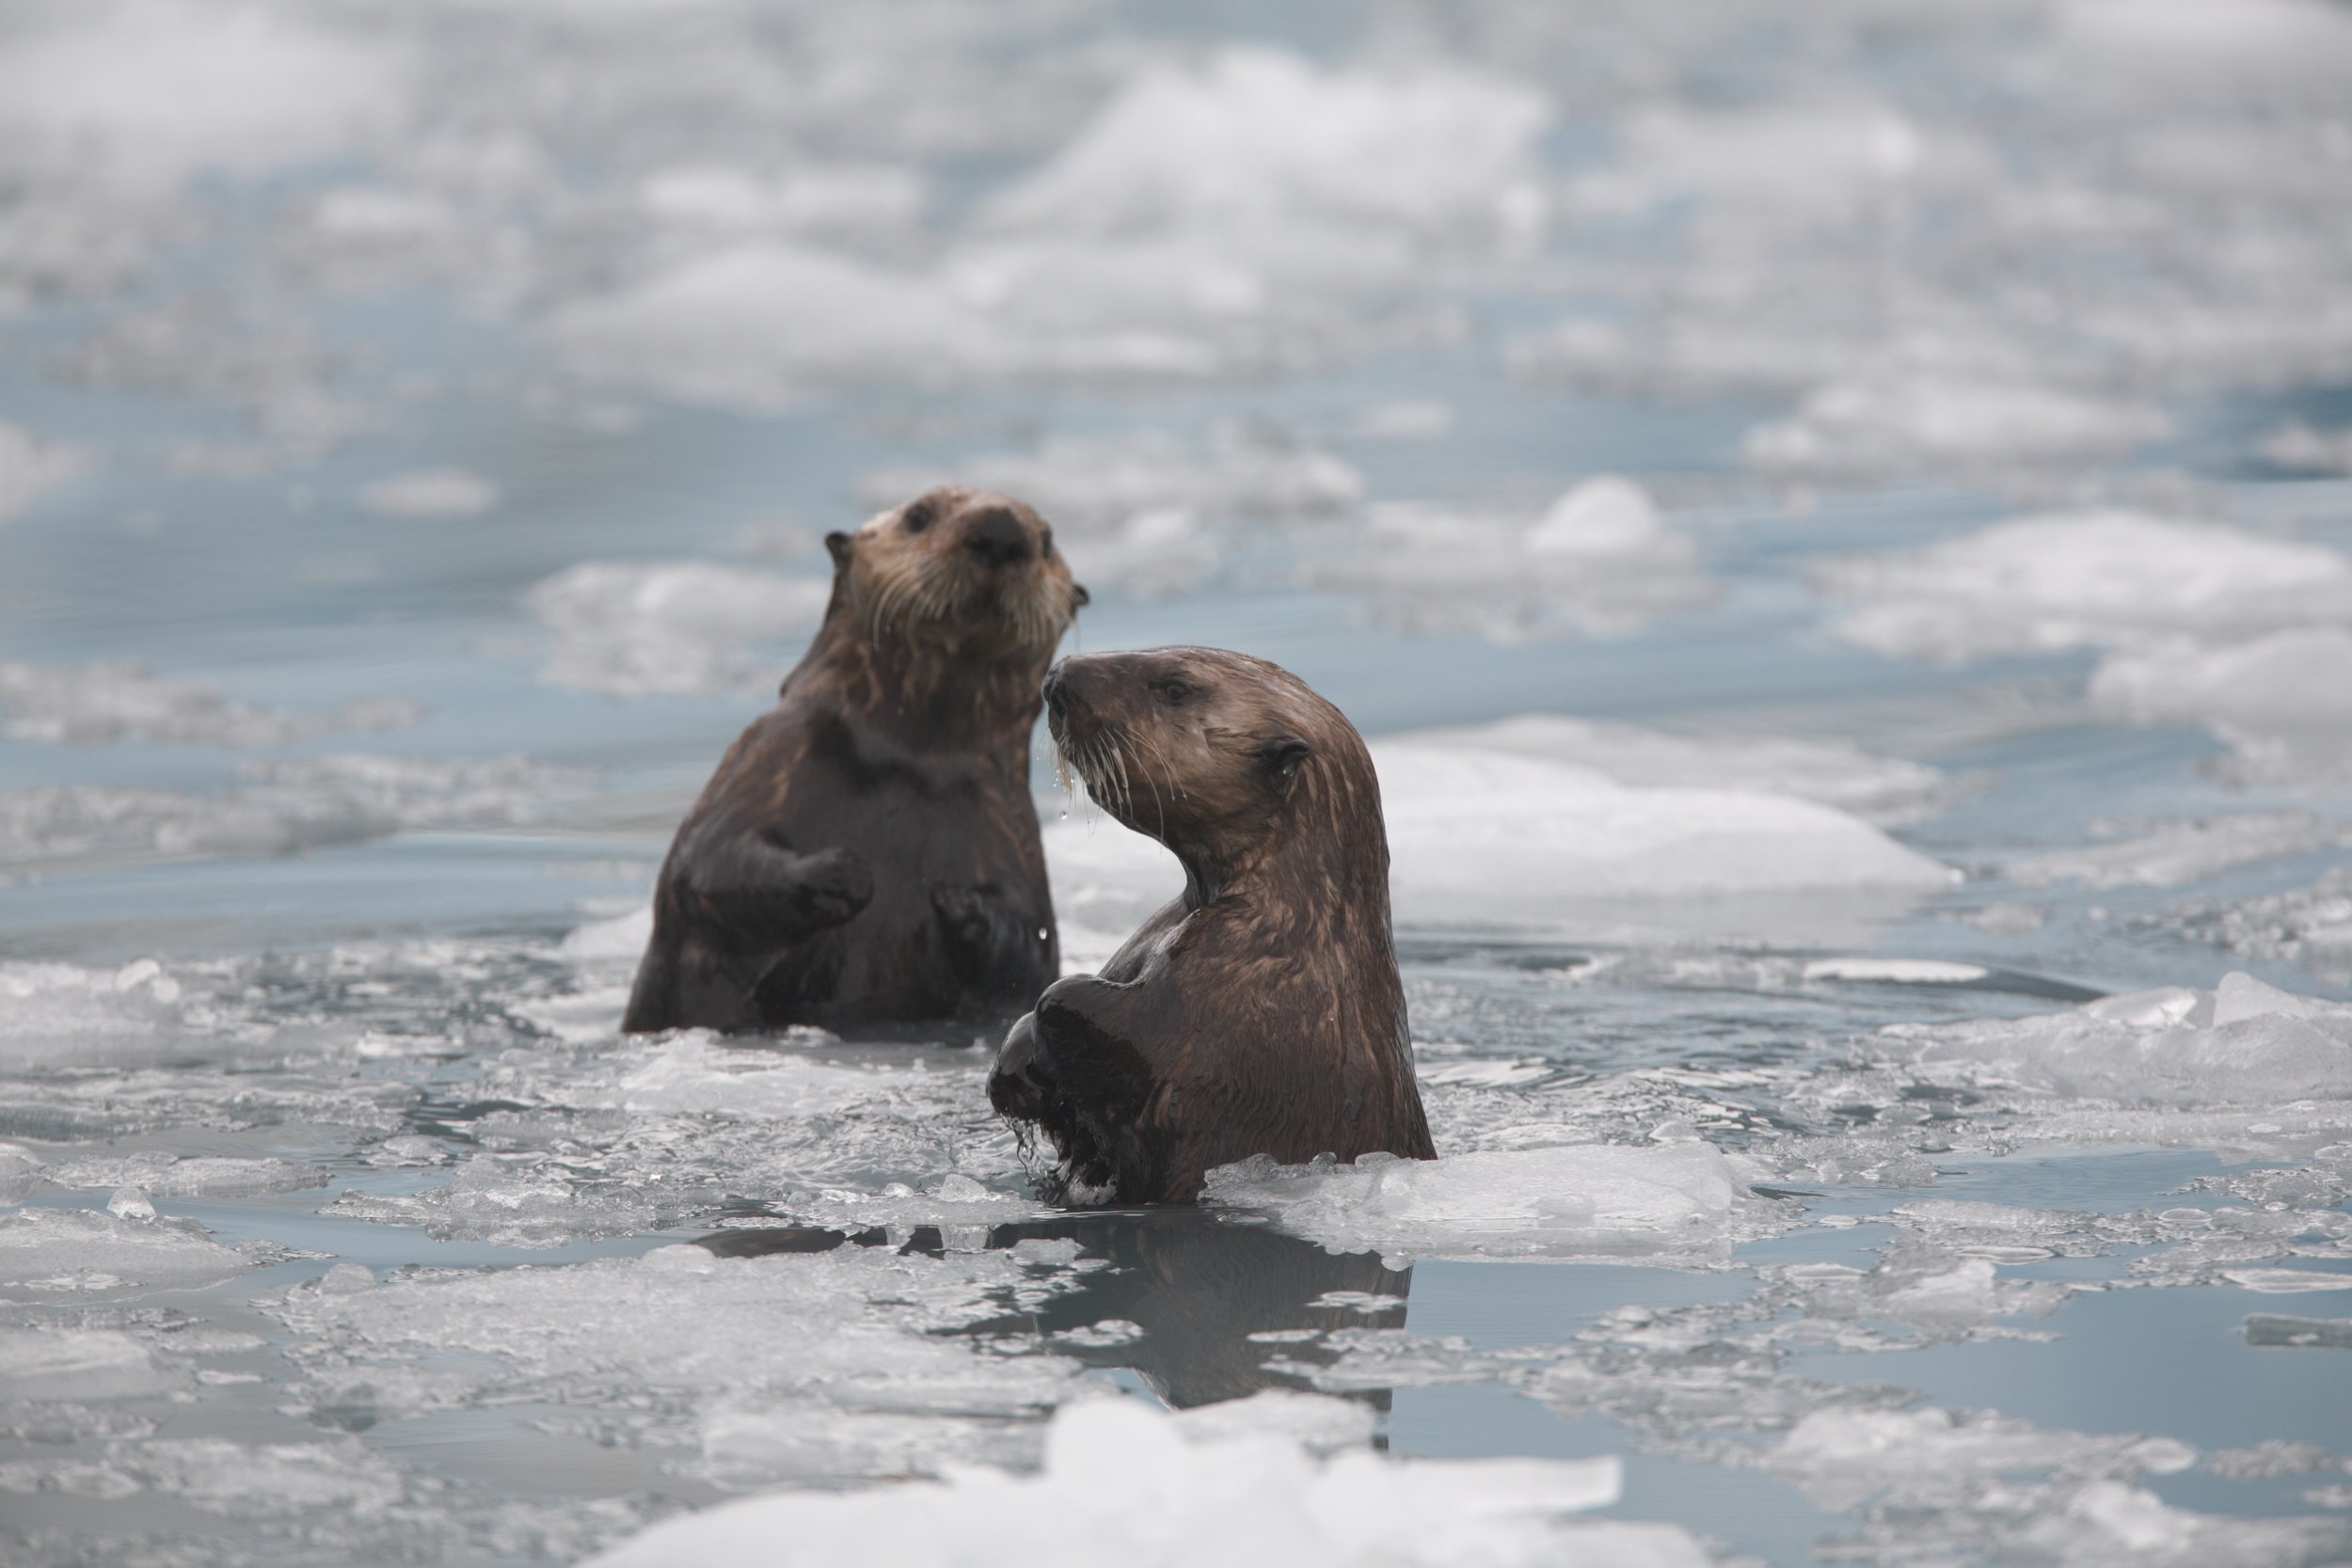 Sea Otters Bob Up and Down in the Icy Water